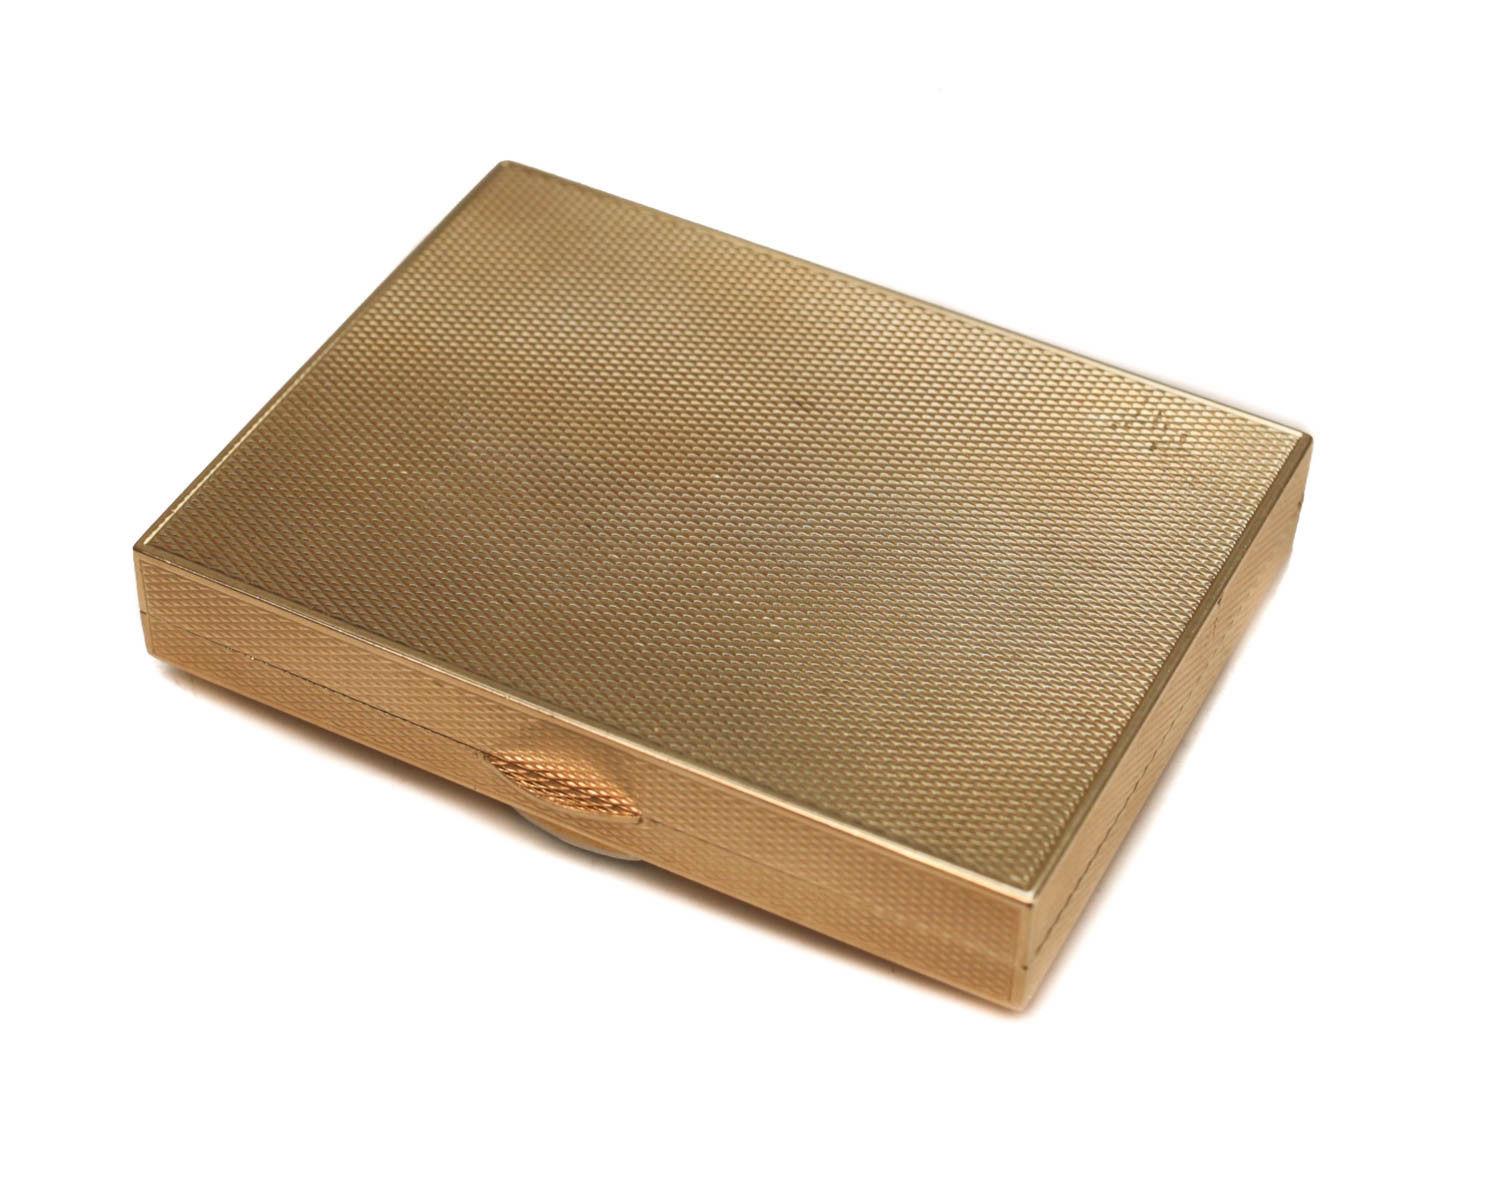 Cartier 14-karat yellow gold and 0.75-carat F-G color VVS clarity diamond compact powder box, circa 1940. Engine turned texture throughout the box with an applied diamond starburst design towards to the lid. Cartier gold marks to the inner lid.